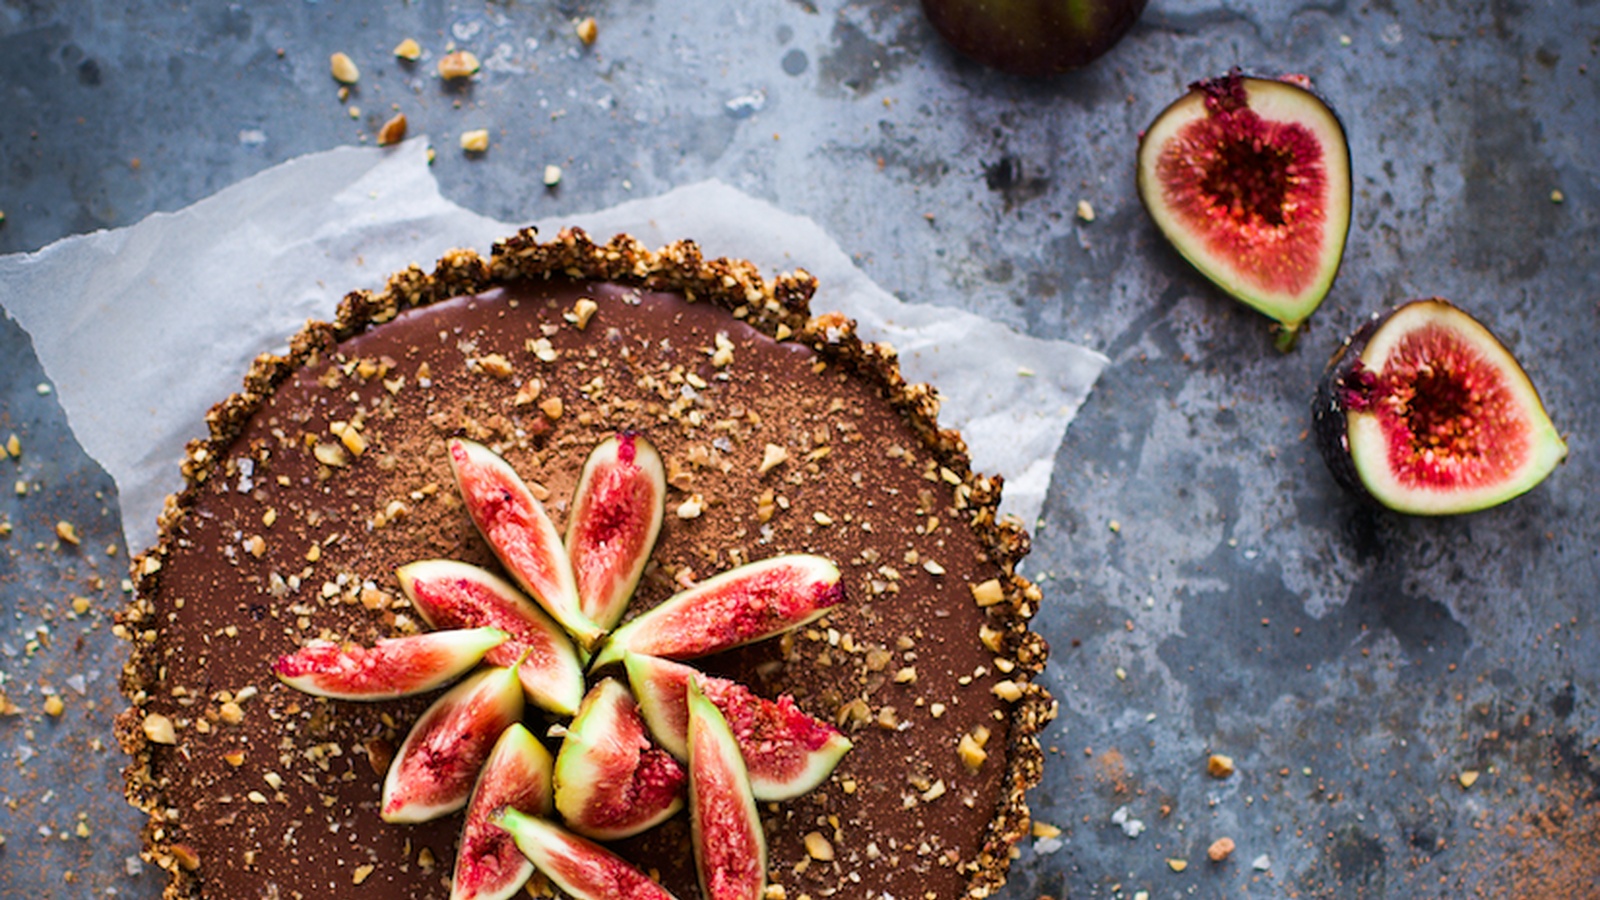 Salted Caramel, Chocolate and Fig Tart (Recipe)